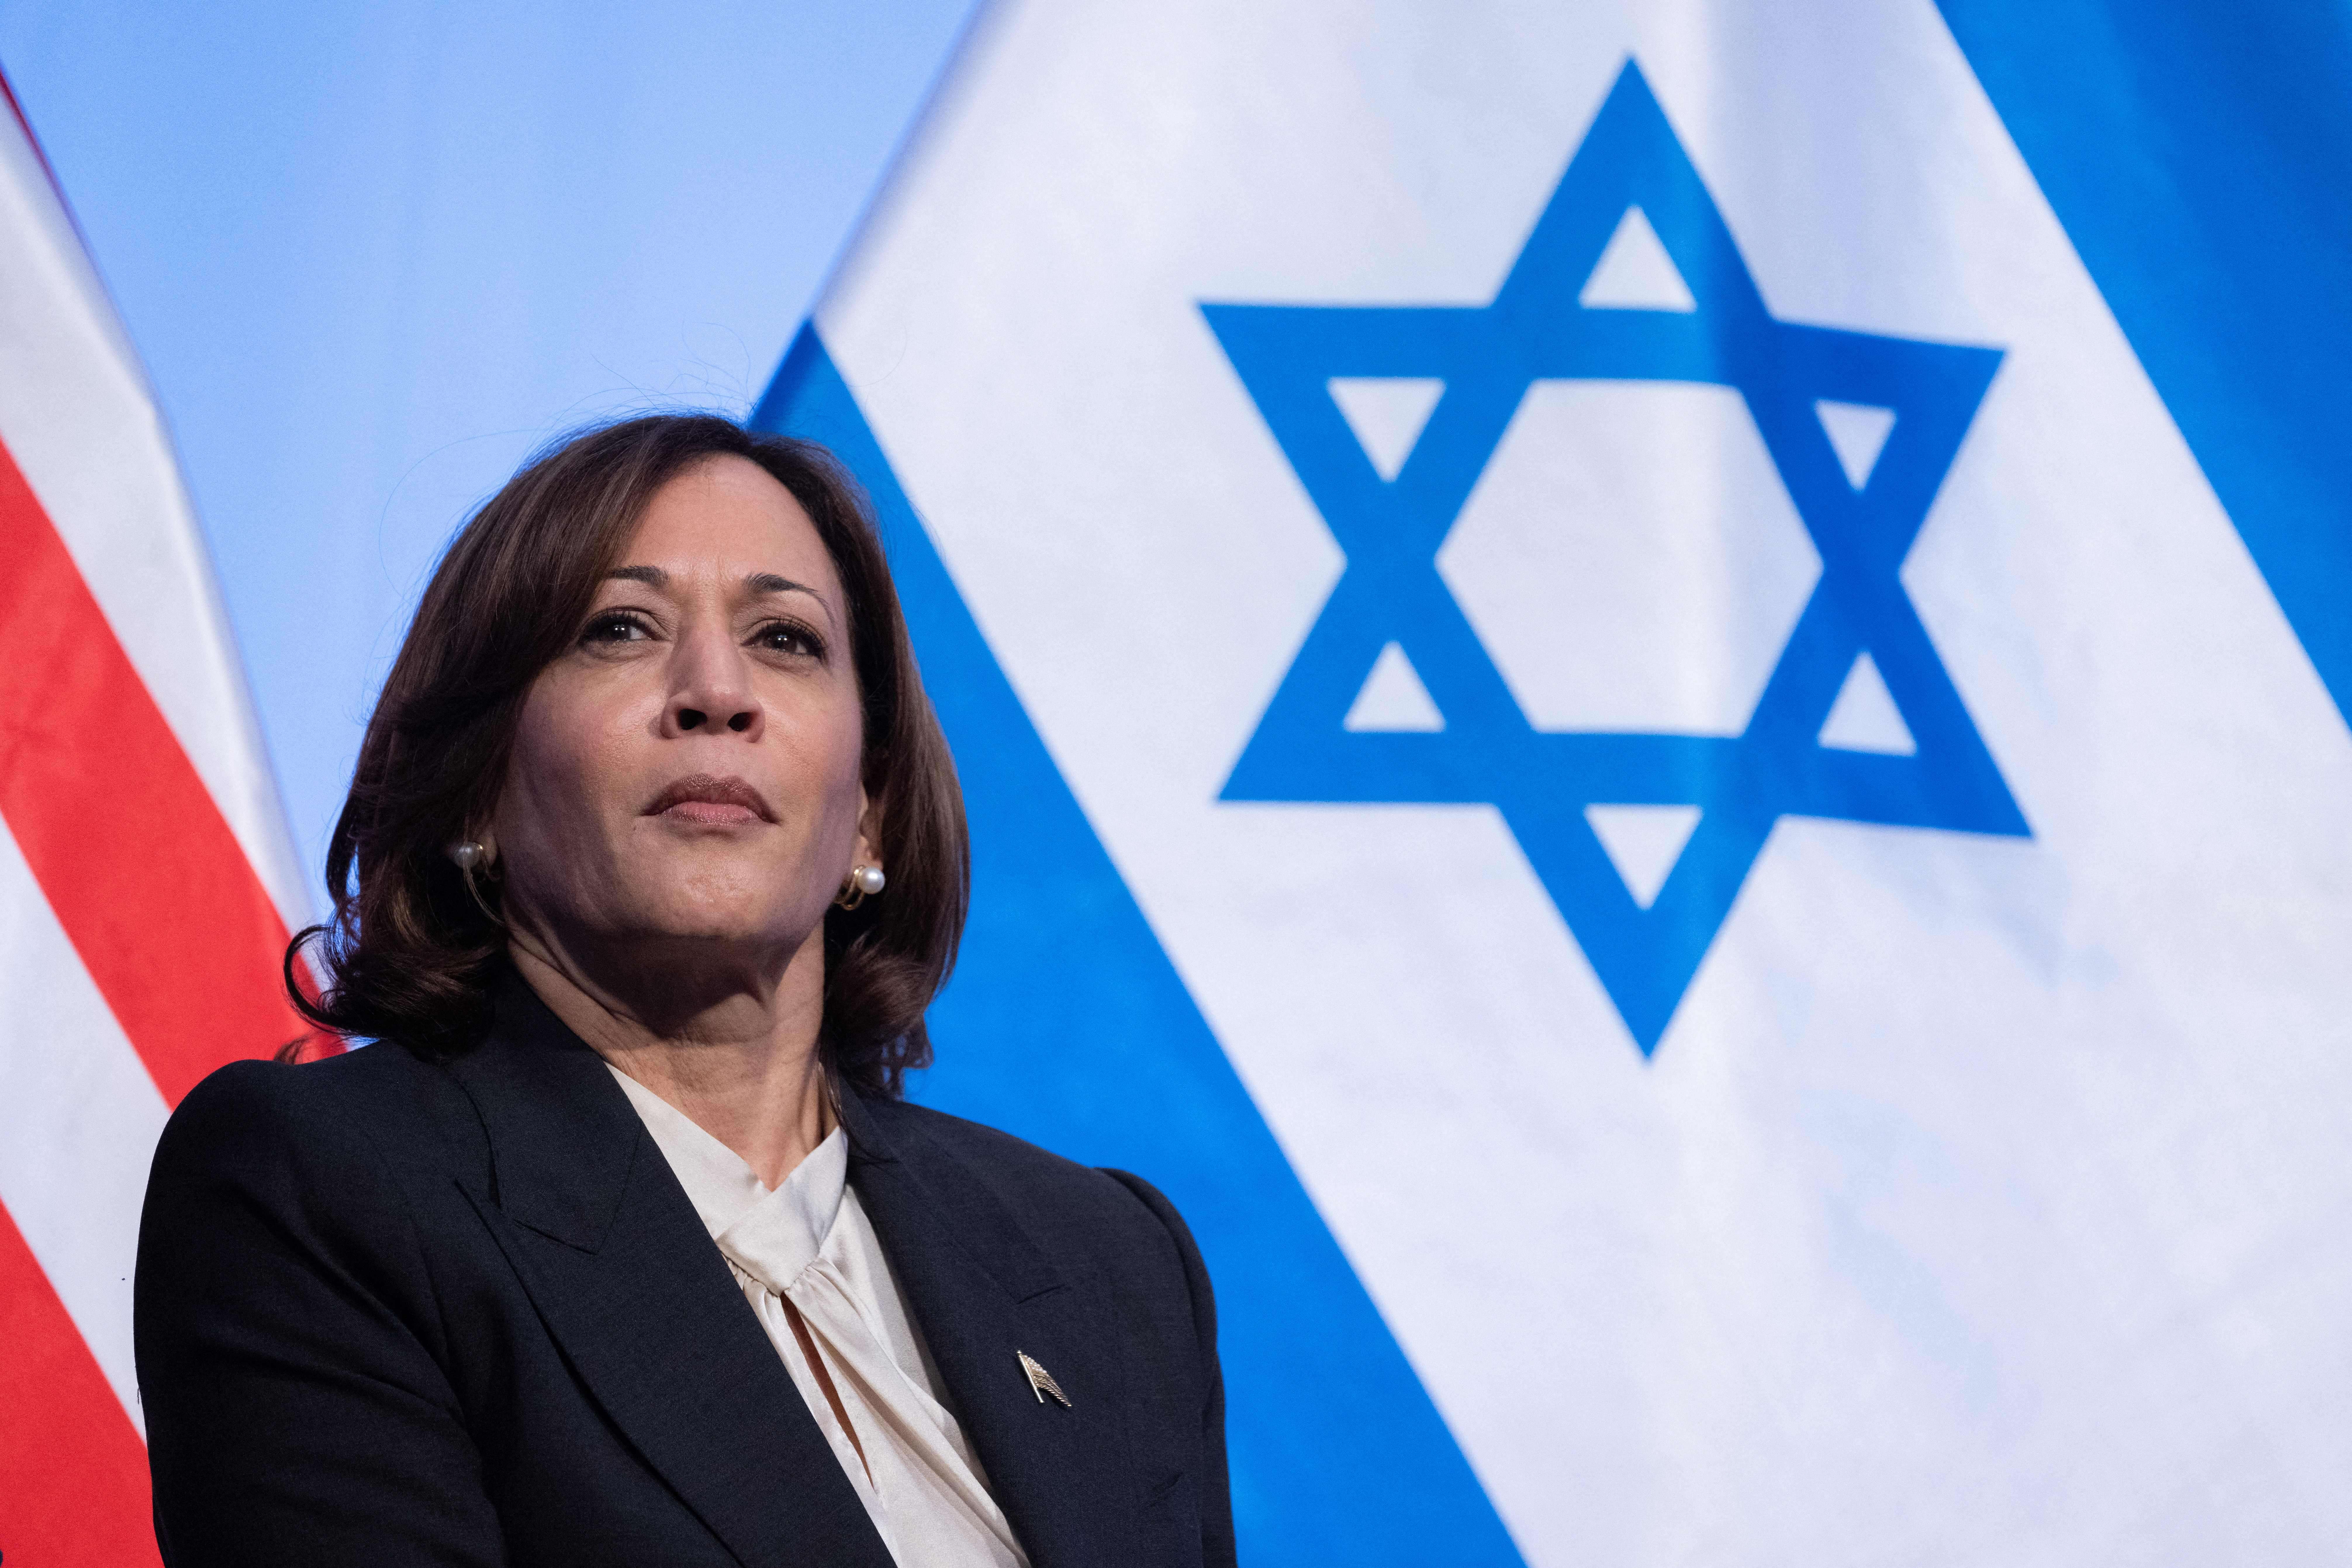 Vice President Kamala Harris attends a reception for Israel's Independence Day, hosted by the Embassy of Israel, at the National Building Museum in Washington, D.C., last June. Harris has been a vocal supporter of Israel's existence as a Jewish state, though she does not appear to have explicitly described herself as a Zionist.